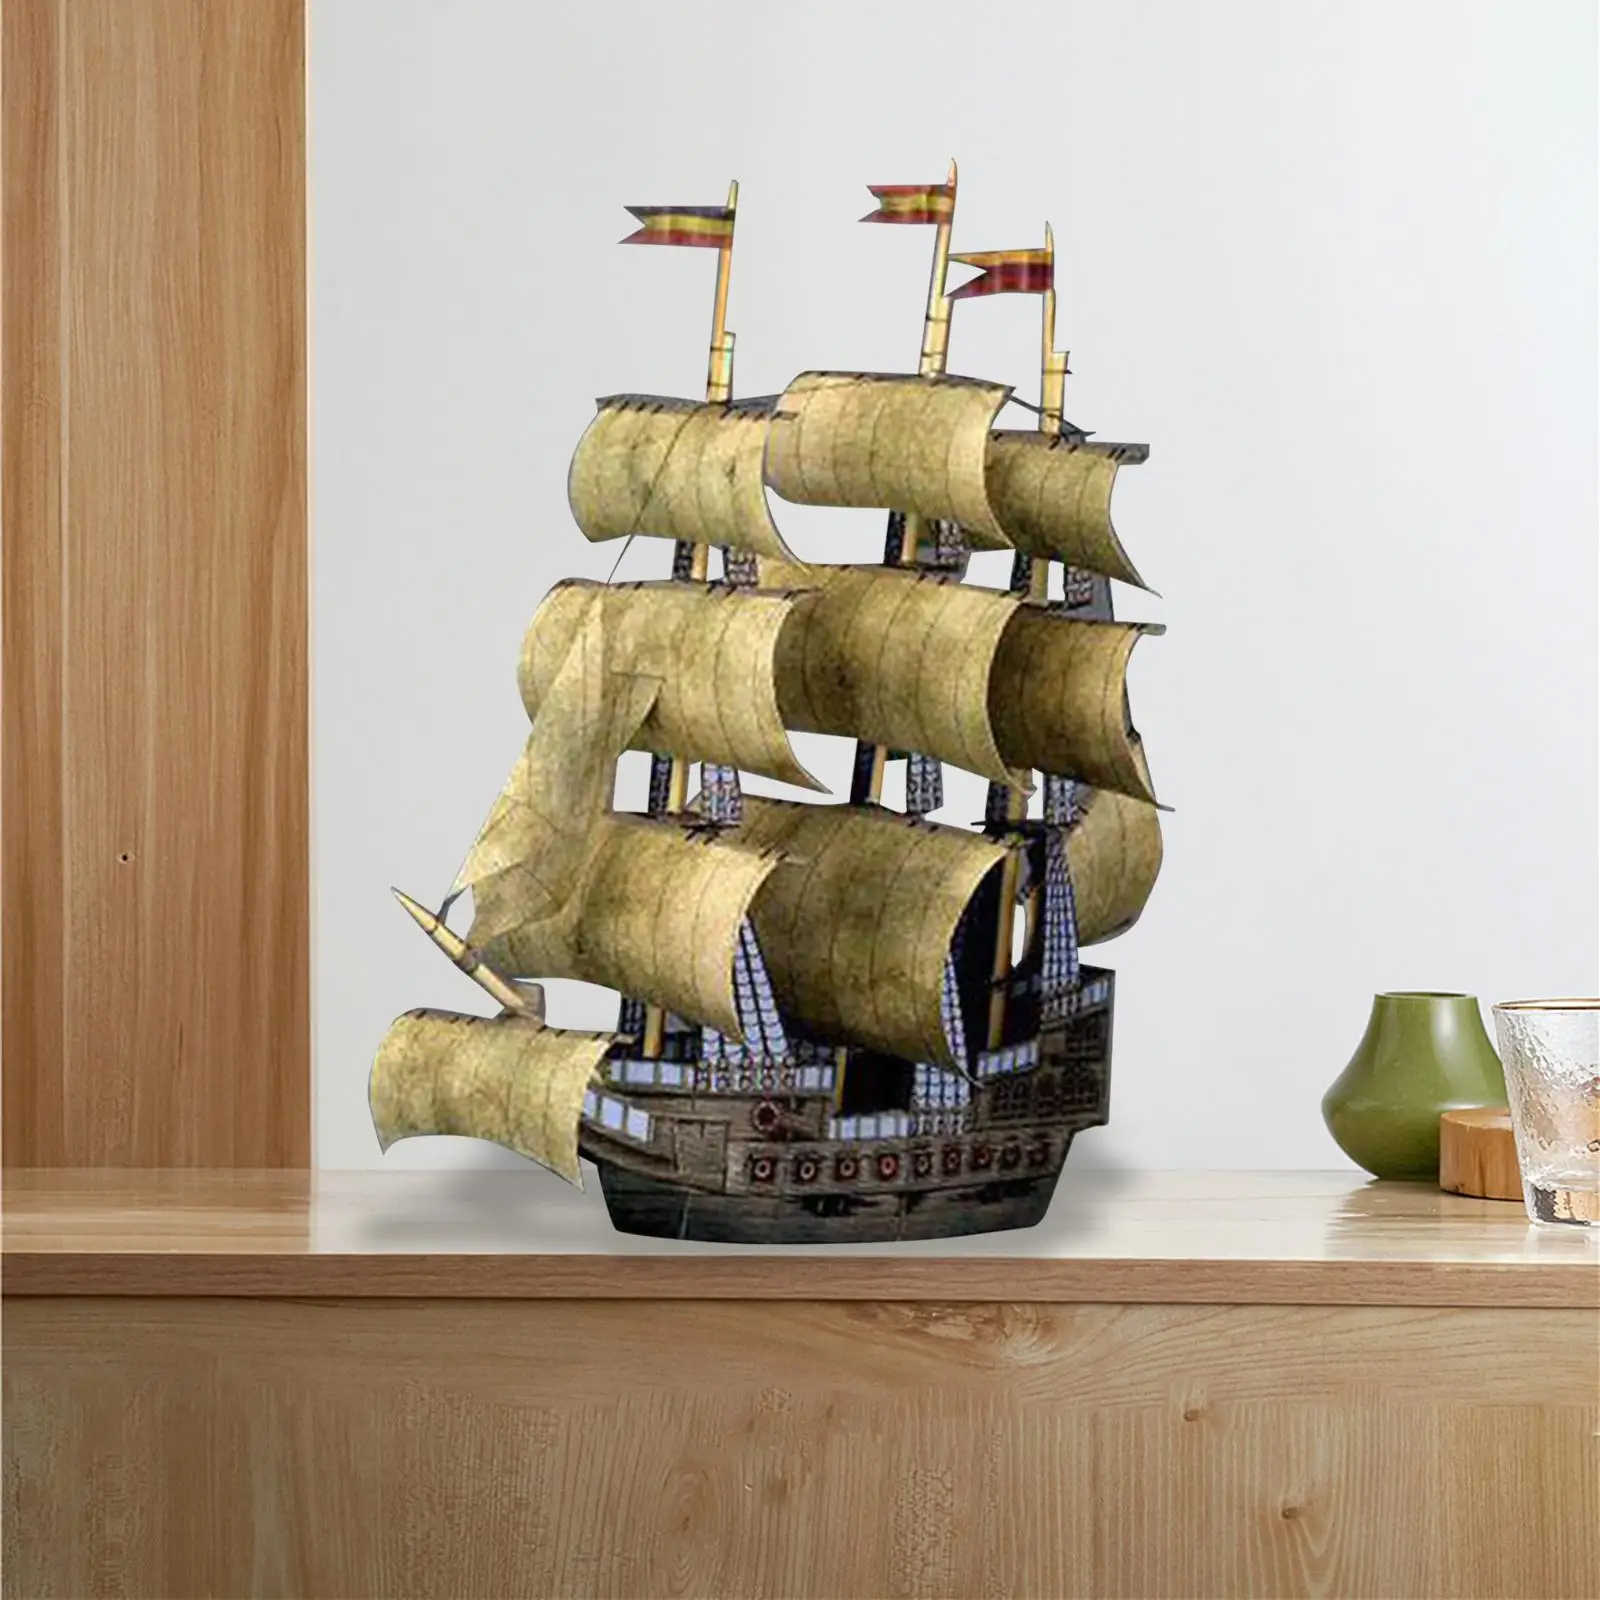 DIY Paper Ship Papercraft DIY Assemble Toy Sailboat Ship Kits 1:250 Scale for Kids Children Adults Home Decoration Boys